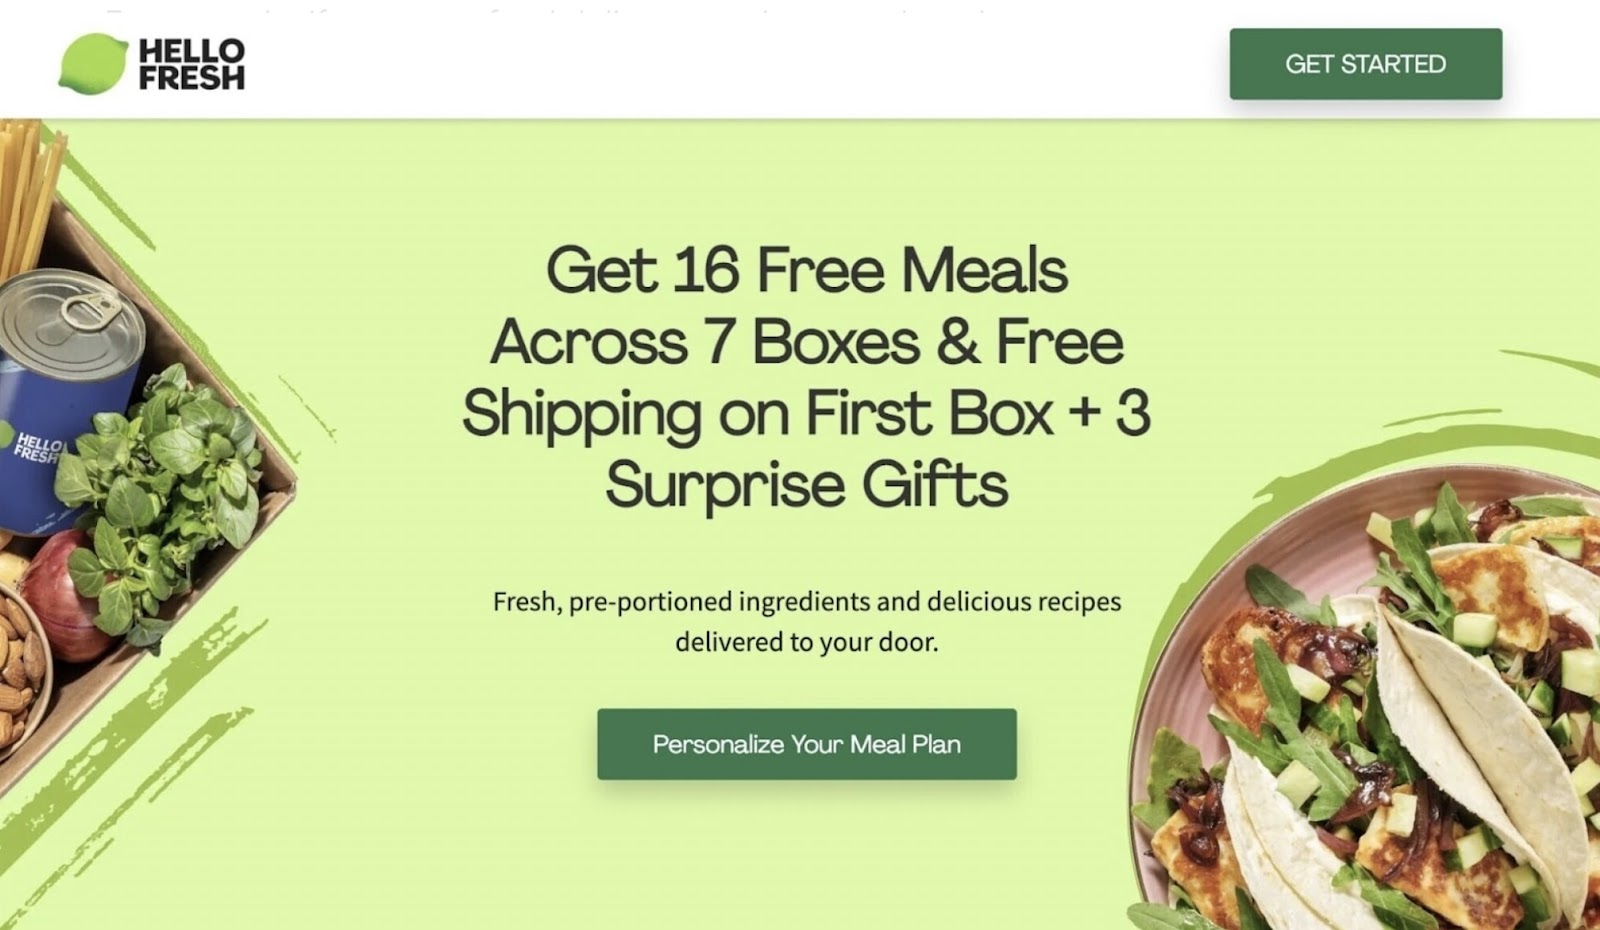 Tacos and meal plan boxes alongside a personalized meal plan offer